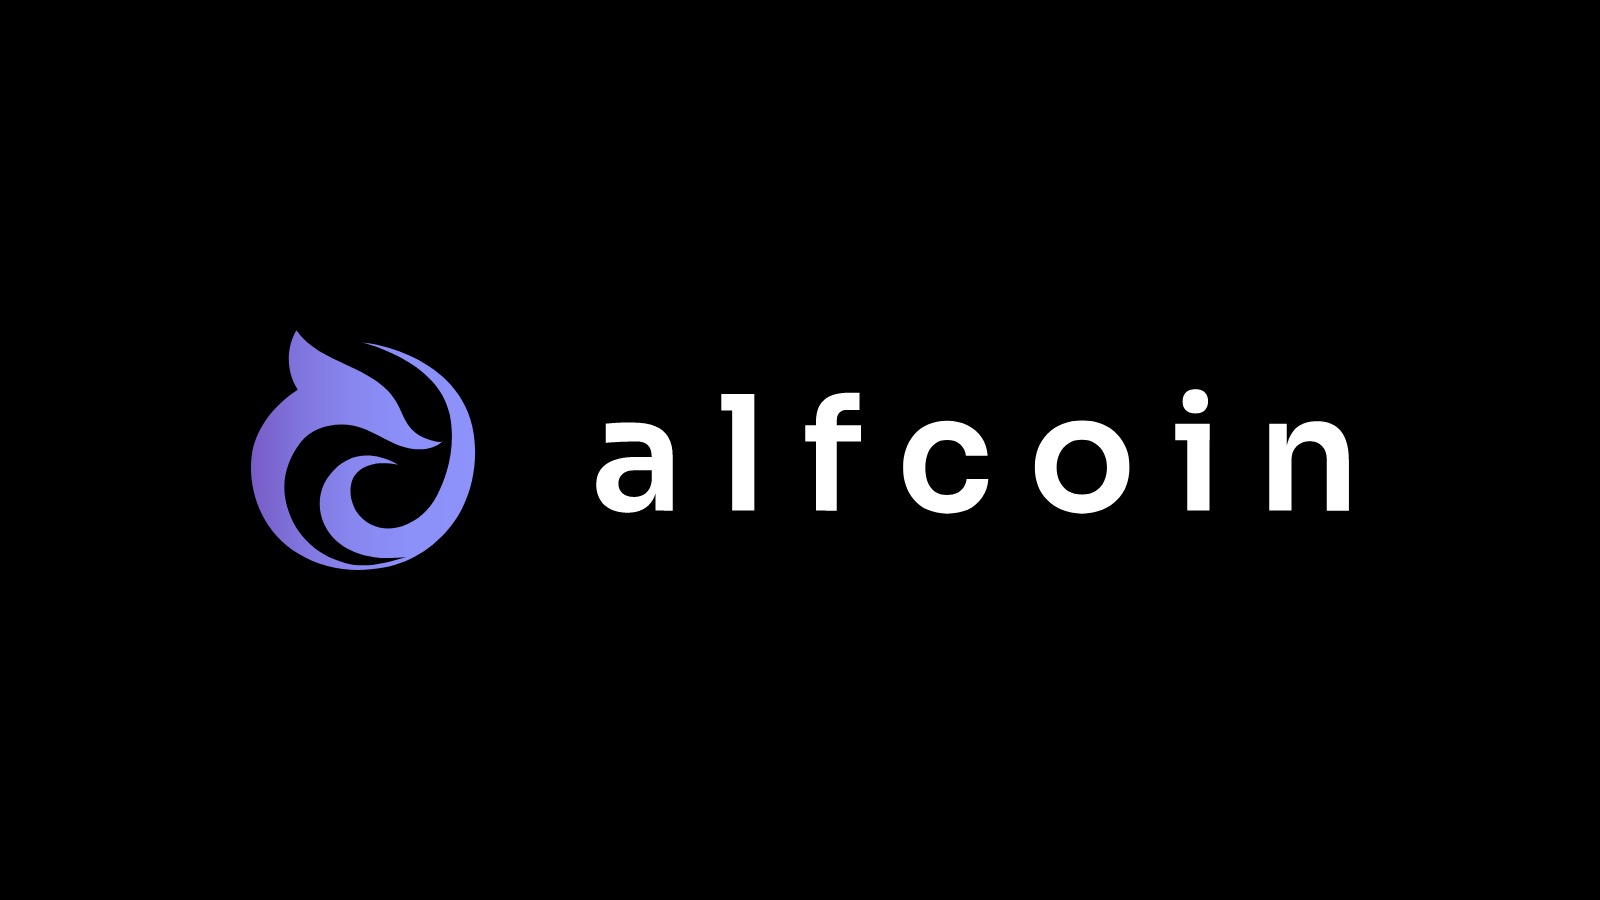 , AlfCoin Establishes Itself as a Exclusive Hedge Fund Cryptocurrency in The Industry.